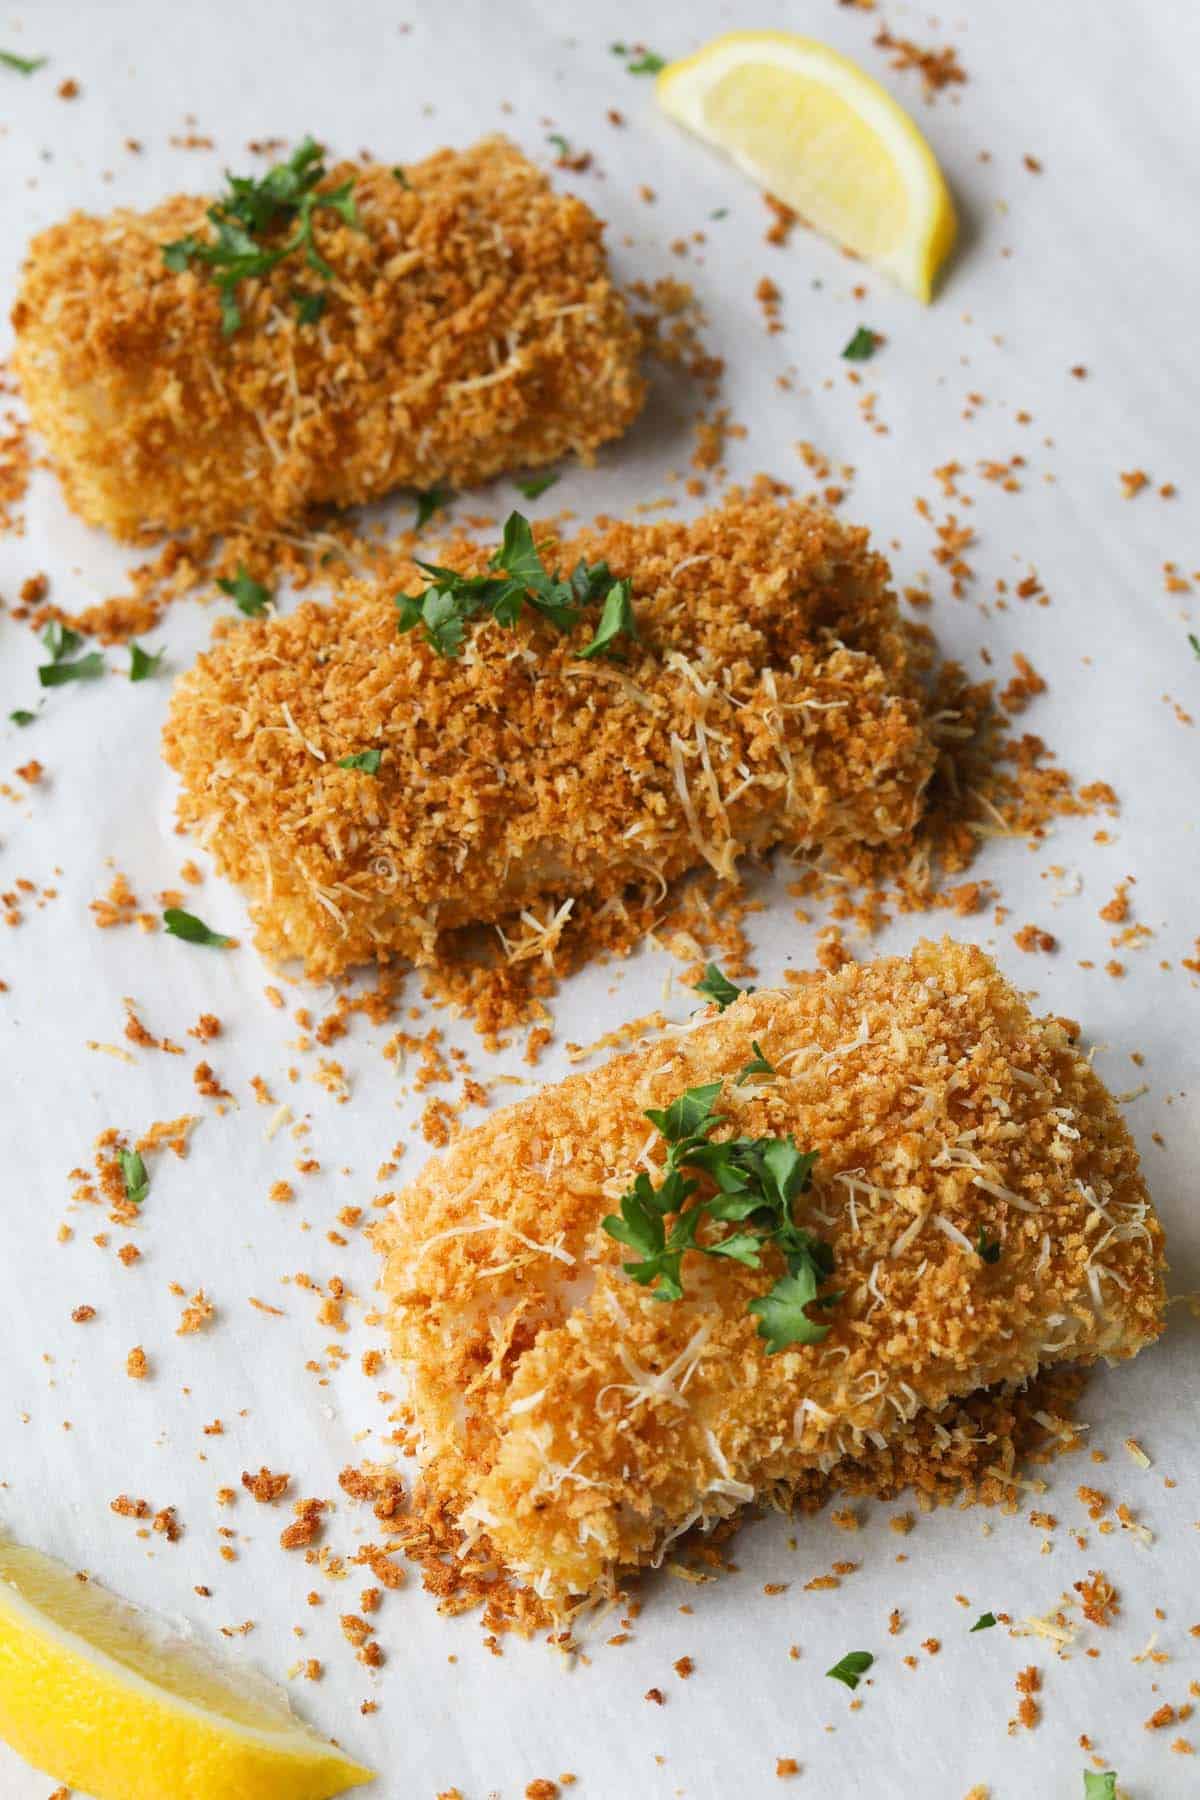 Three breaded cooked cod fillets on a baking sheet.